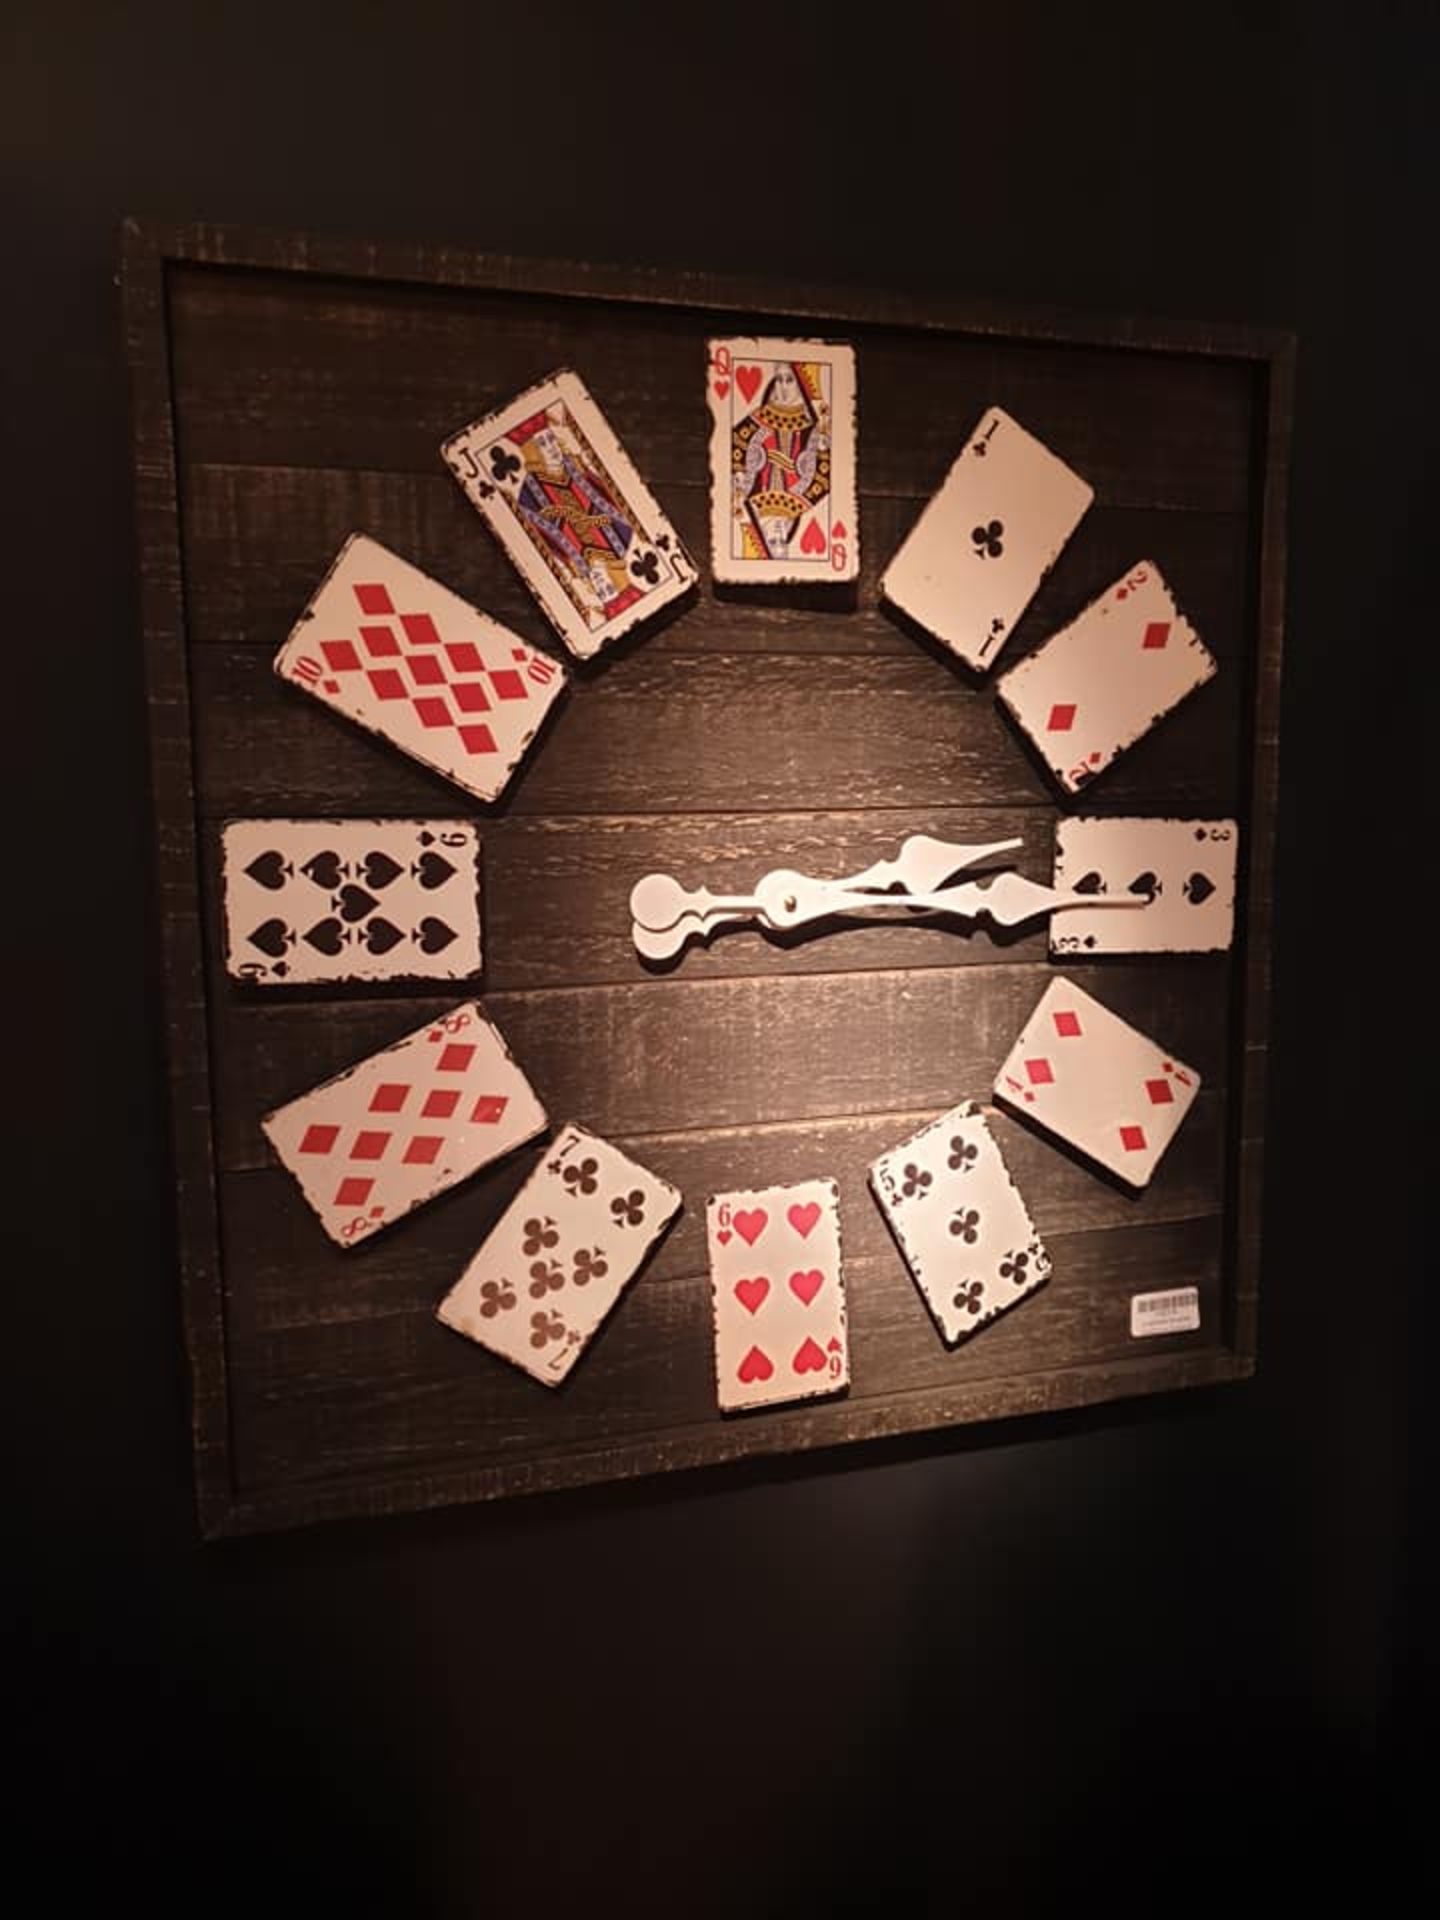 Playing Cards Wall Clock Decorate Your Game Room With Your Favourite Pastime. This Large Wall